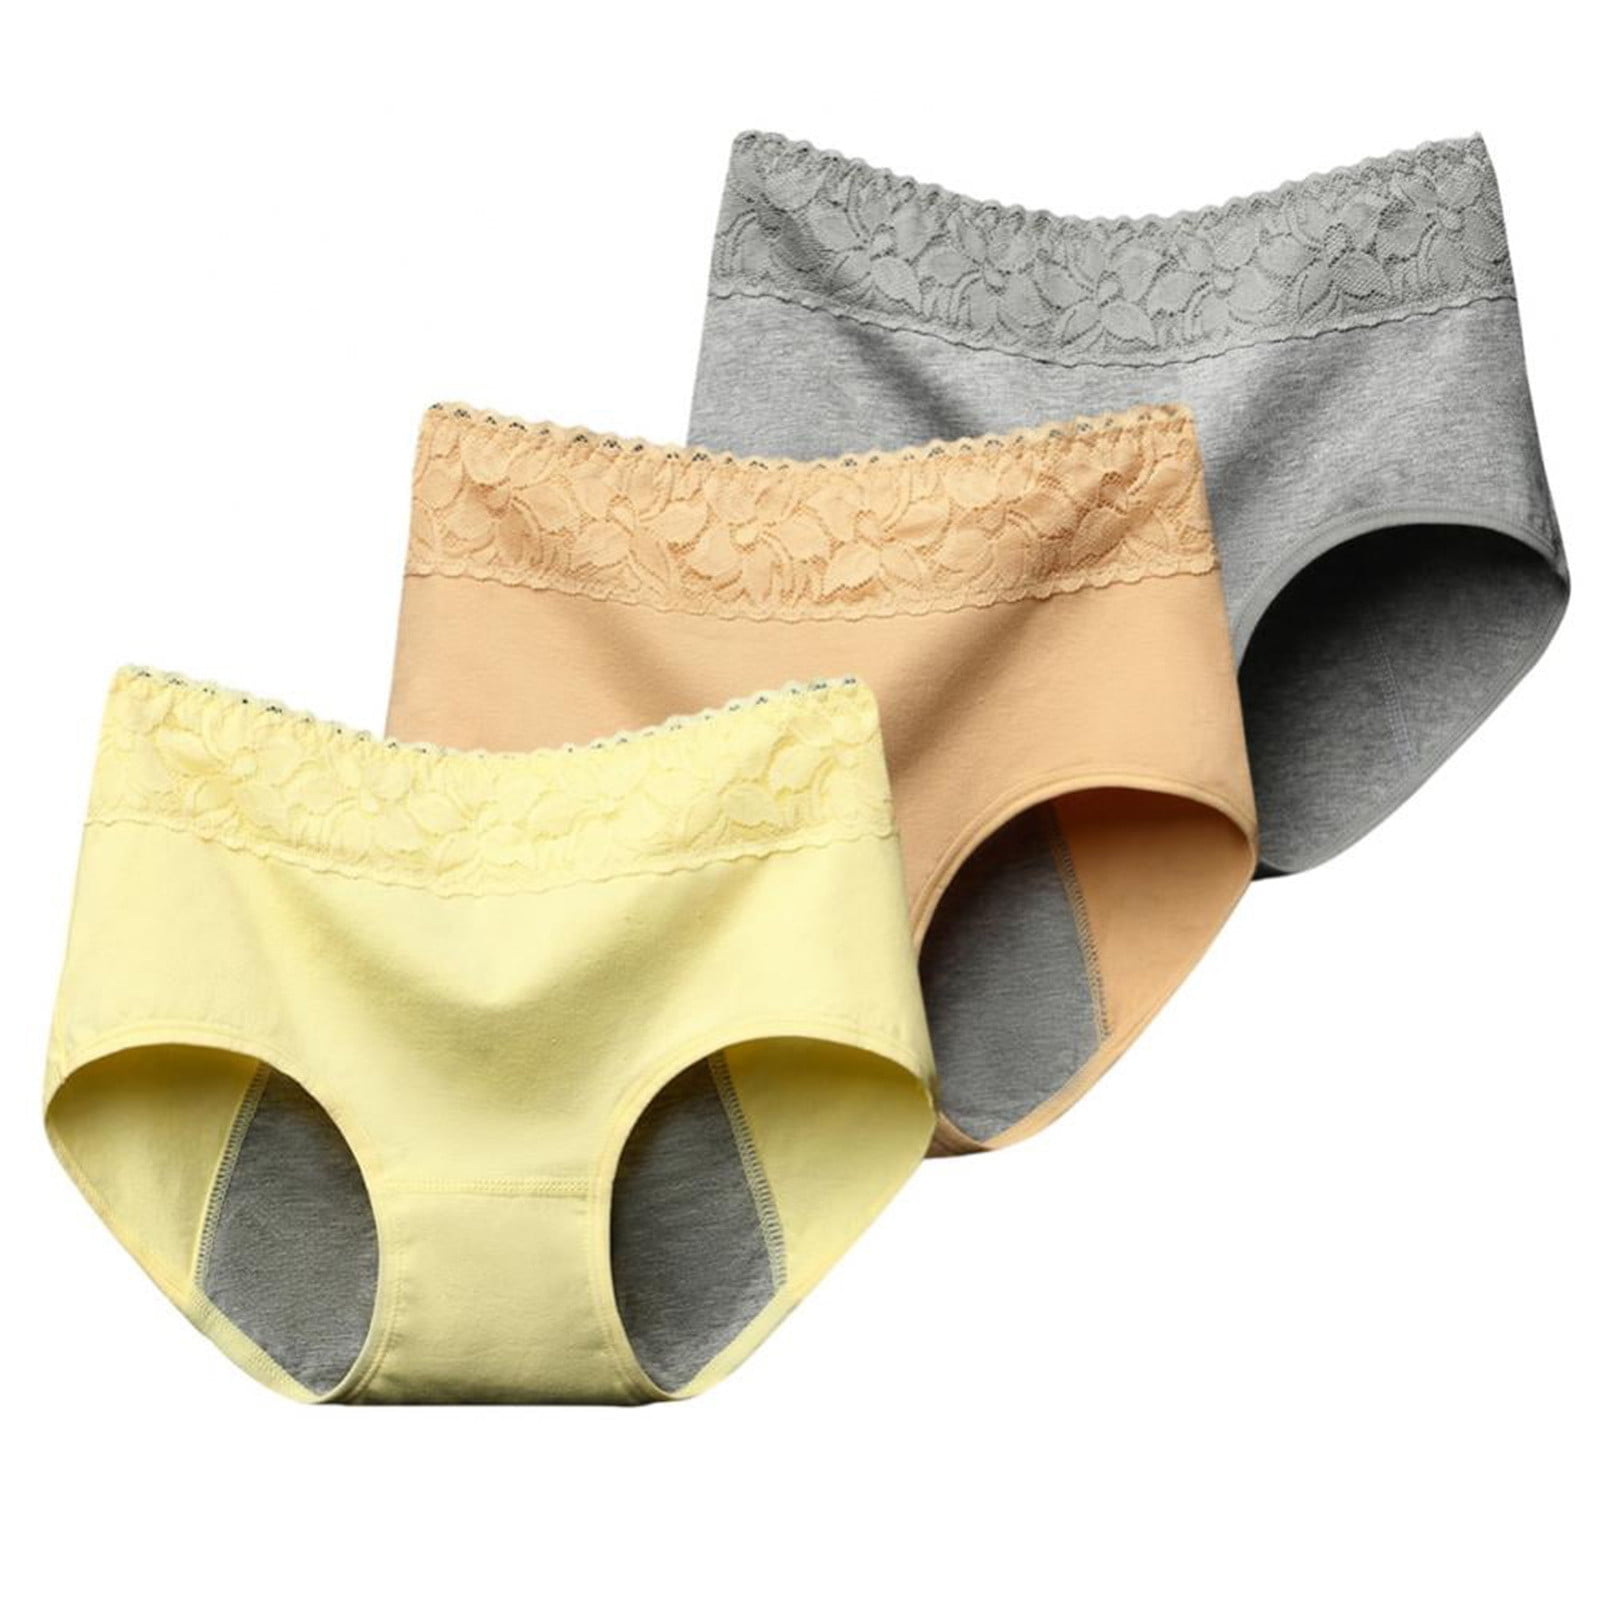 Sksloeg Panties for Women Breathable High Middle Waist Solid Color